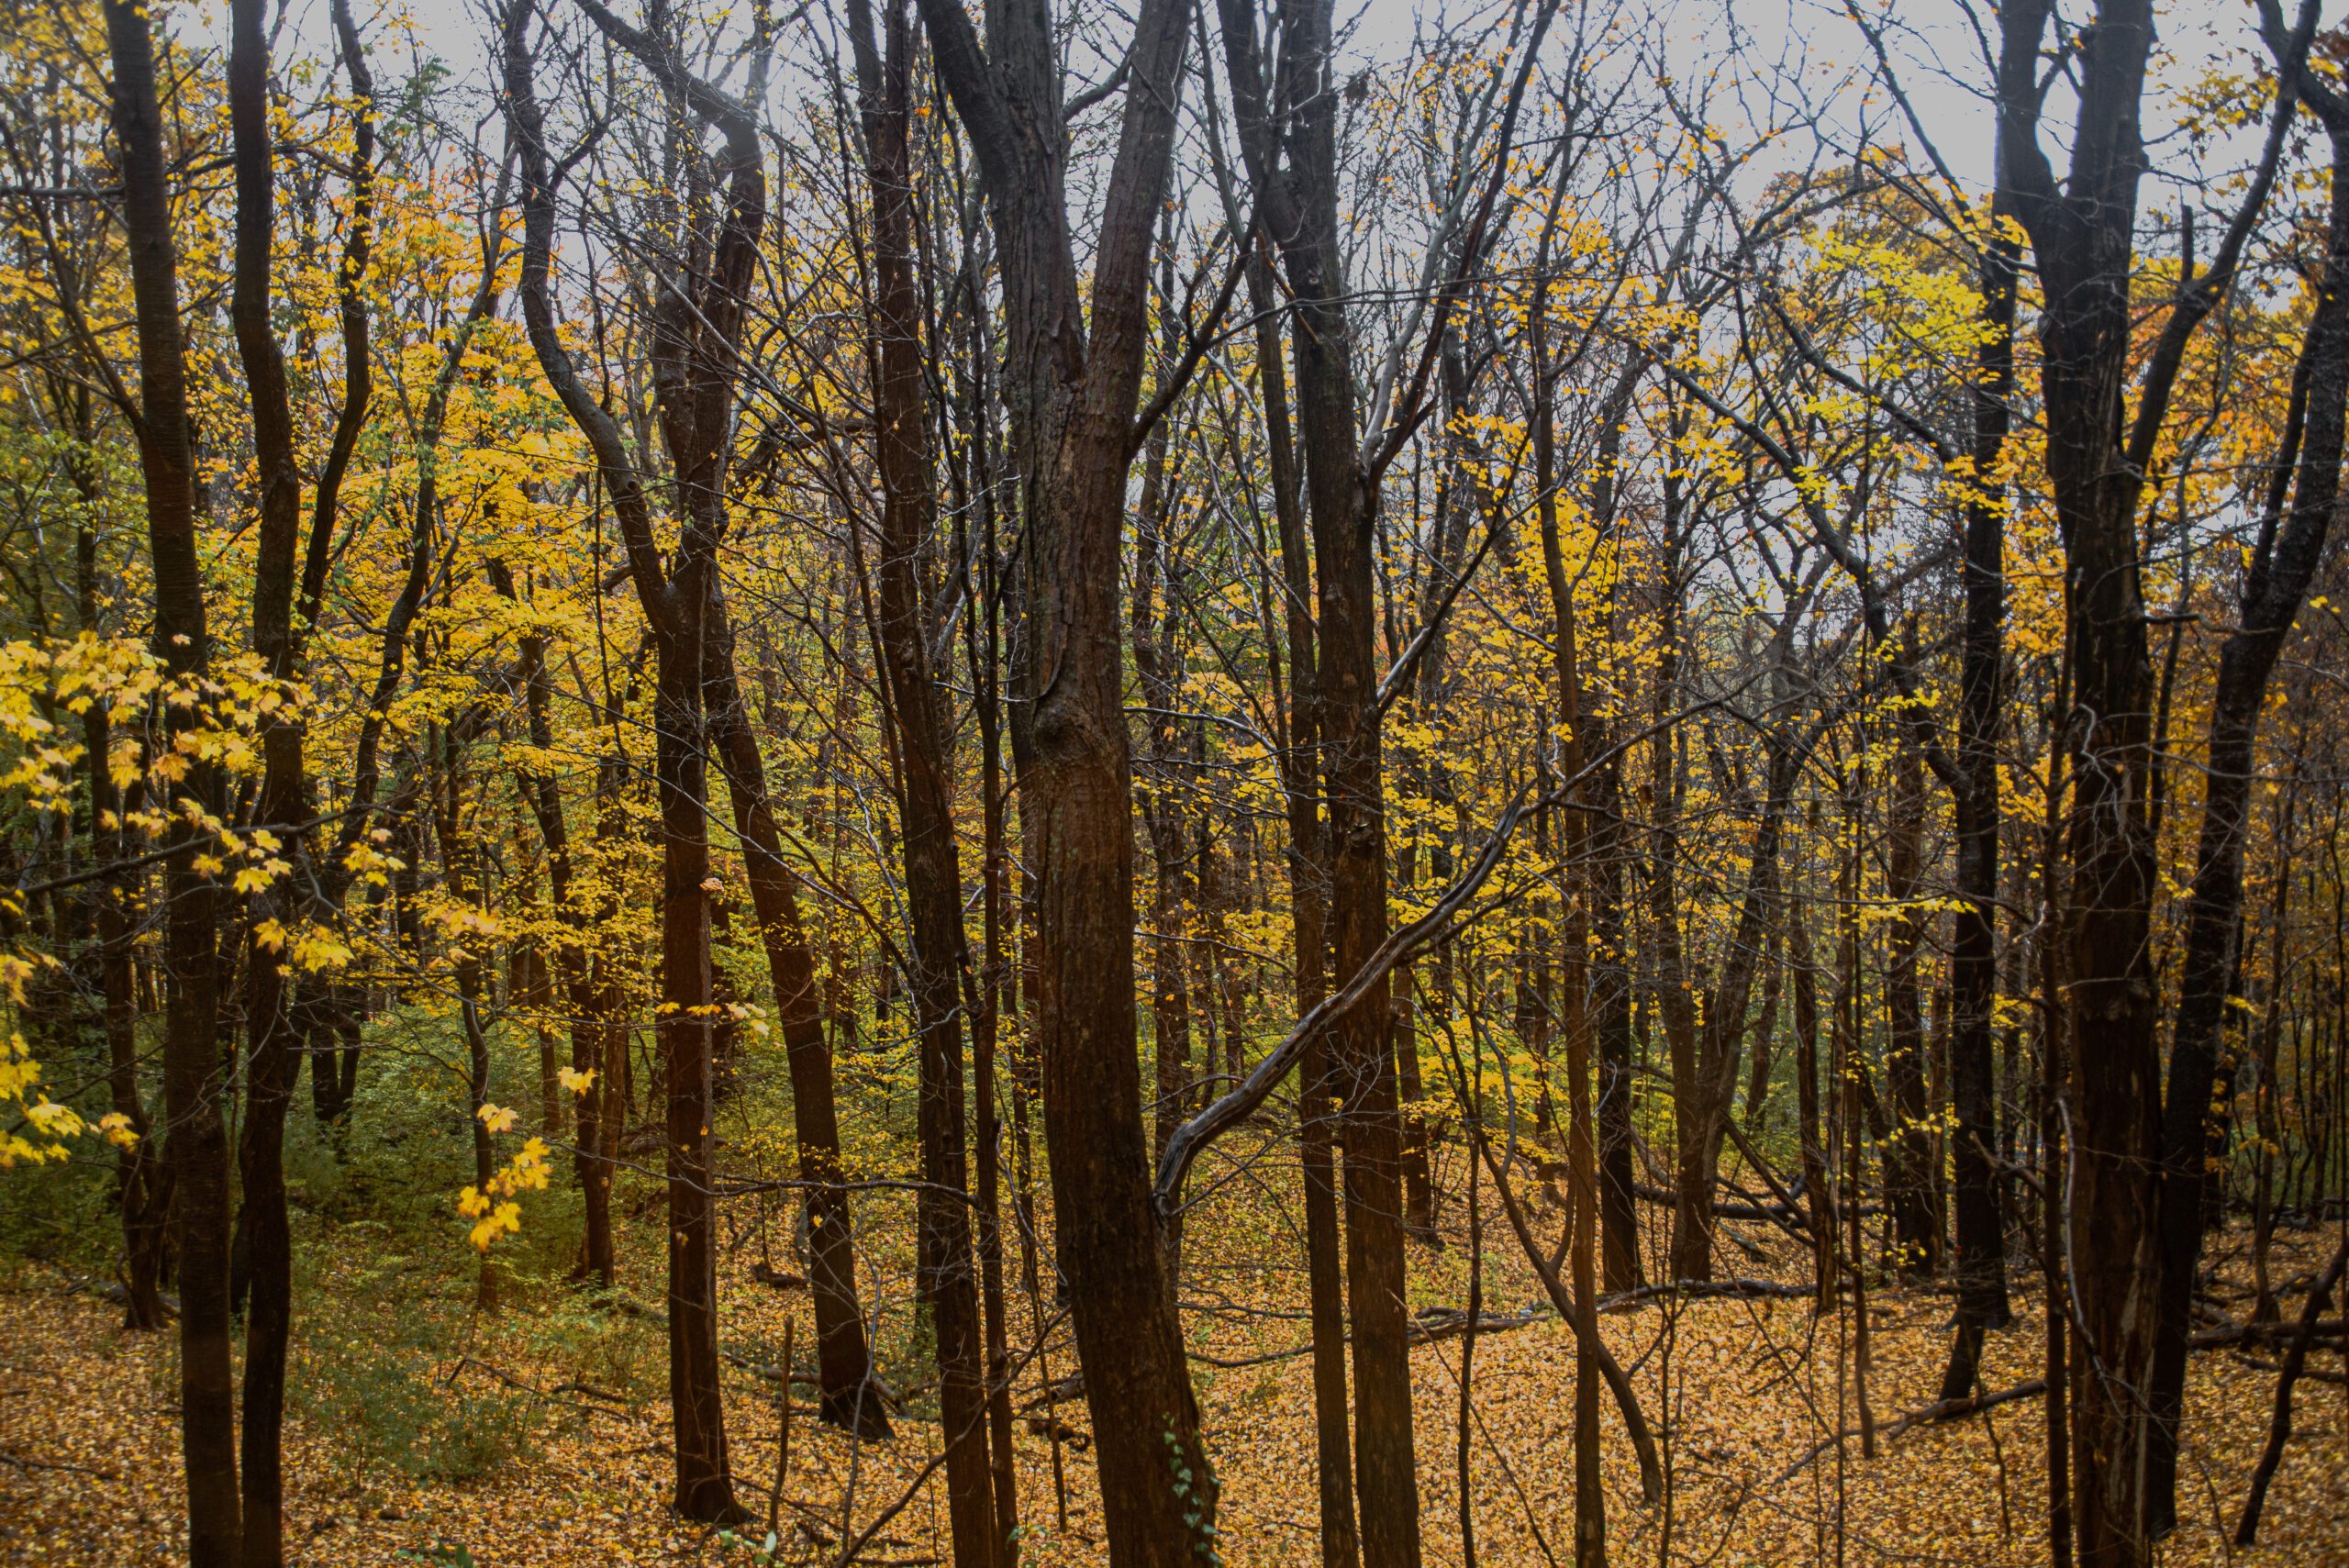 Franklin Crawford Image Uploaded on November 12, 2021 woods stand of trees partially leafed